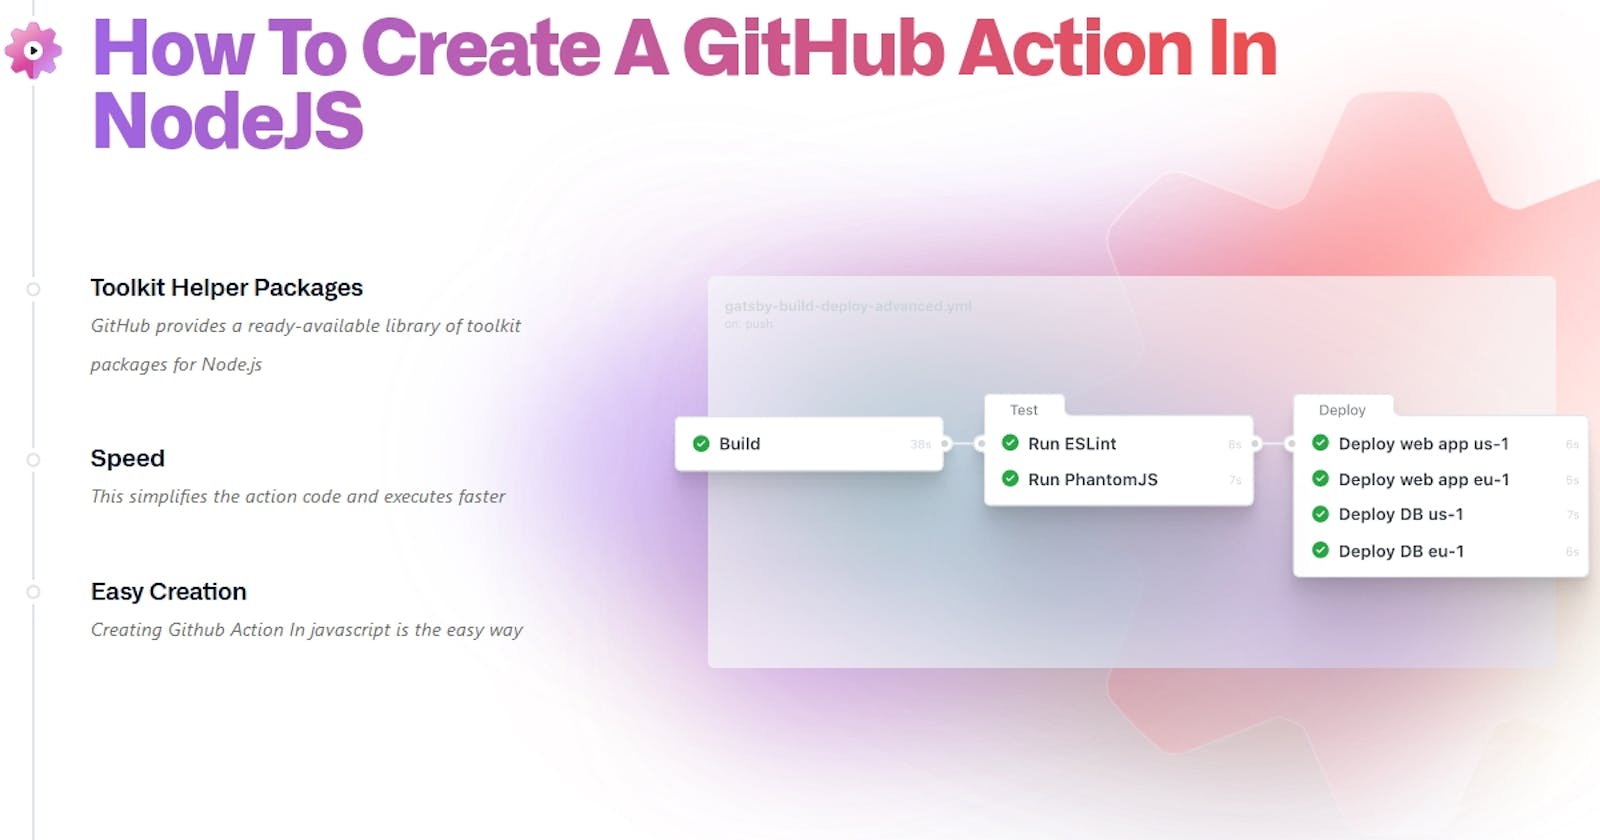 How To Create A GitHub Action In NodeJS